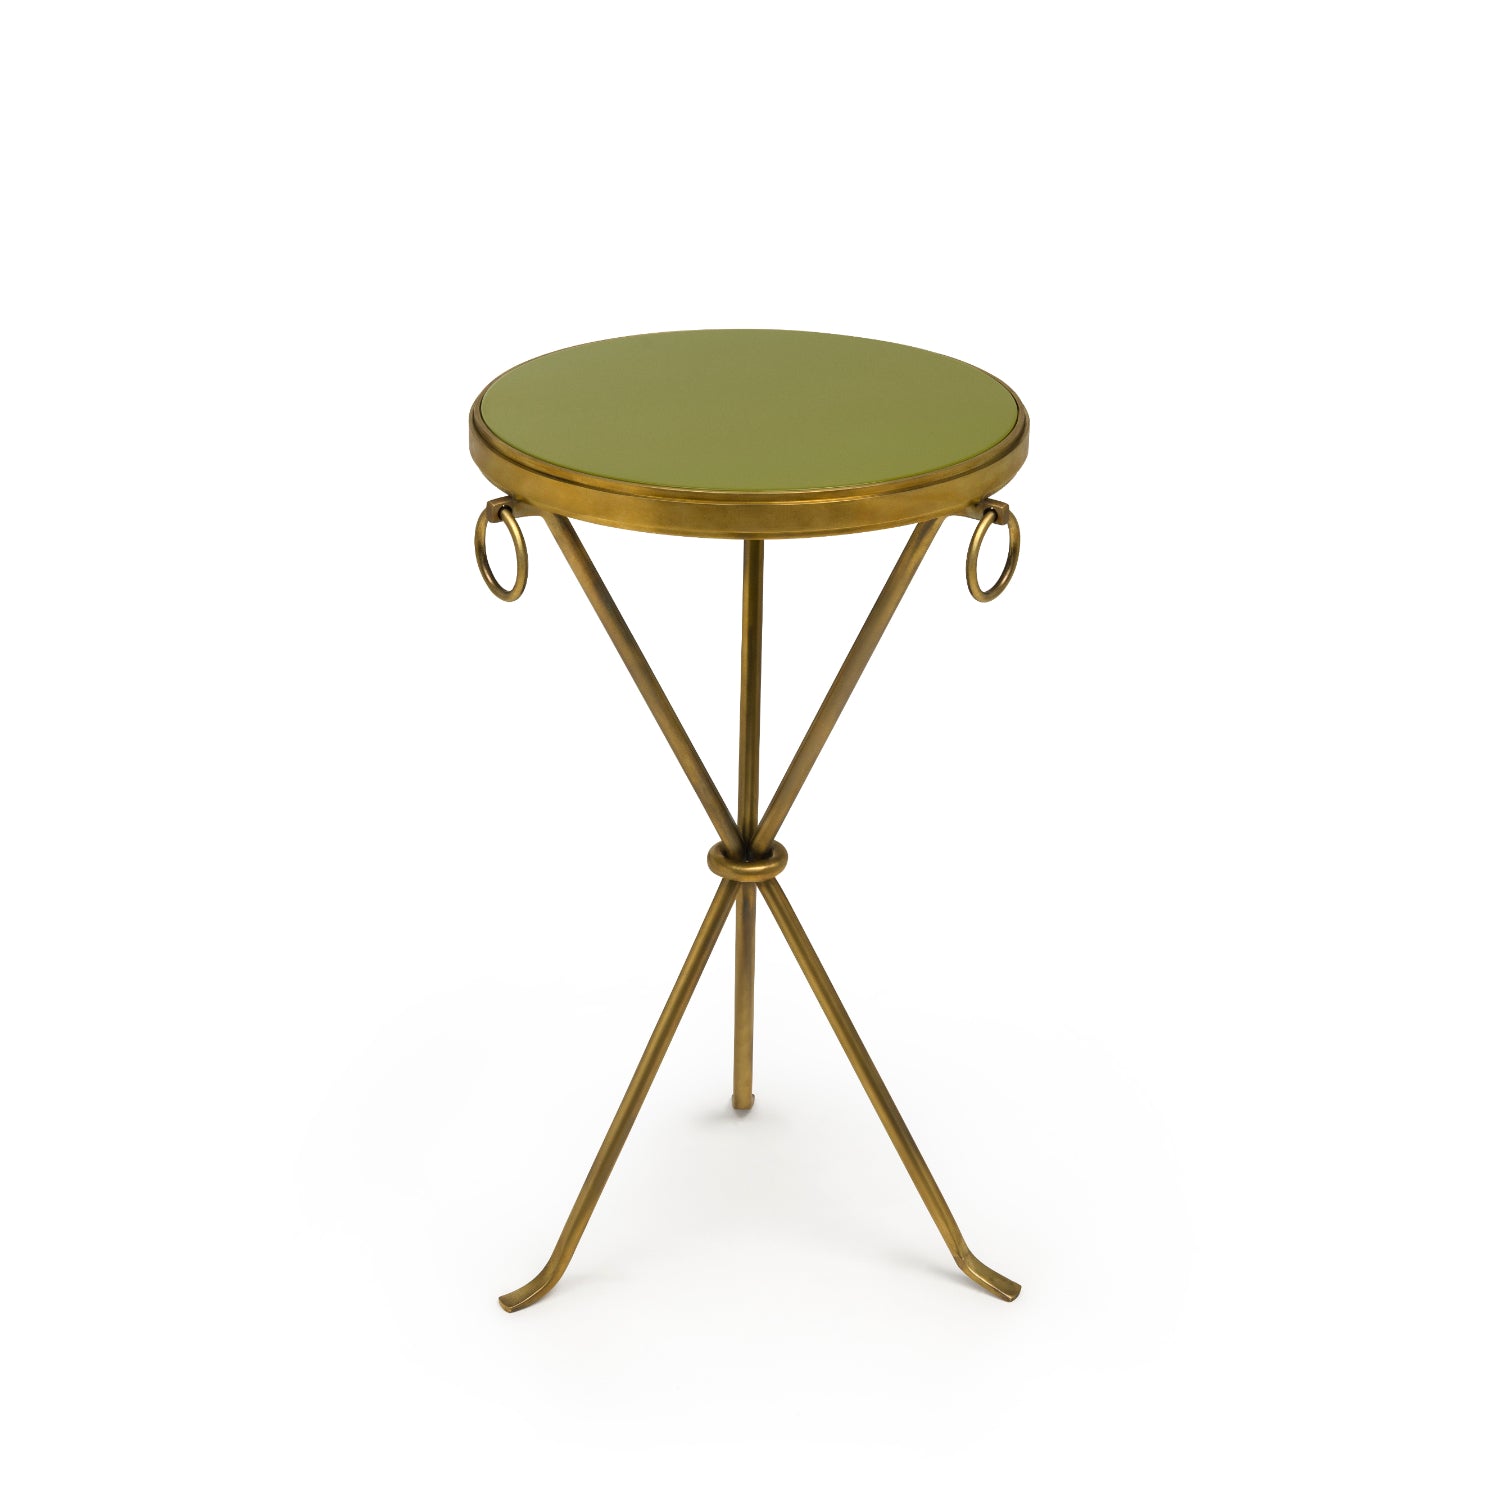 Lacquer Drinks Table Brass Base, Green by The Lacquer Company